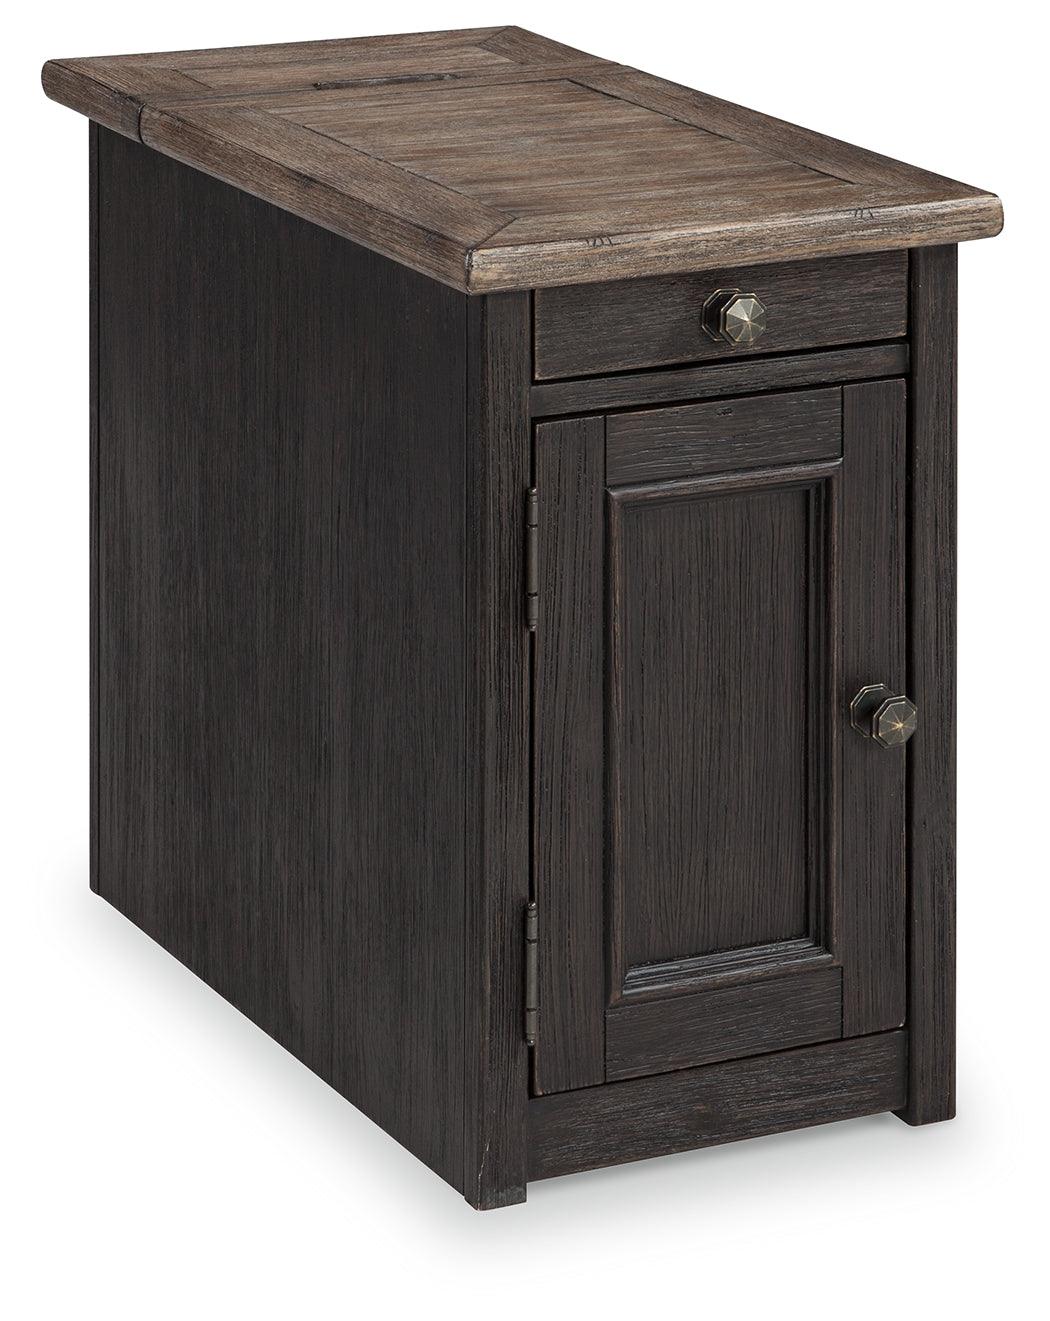 Tyler Creek Grayish Brown/Black Chairside End Table With Usb Ports & Outlets - Ella Furniture